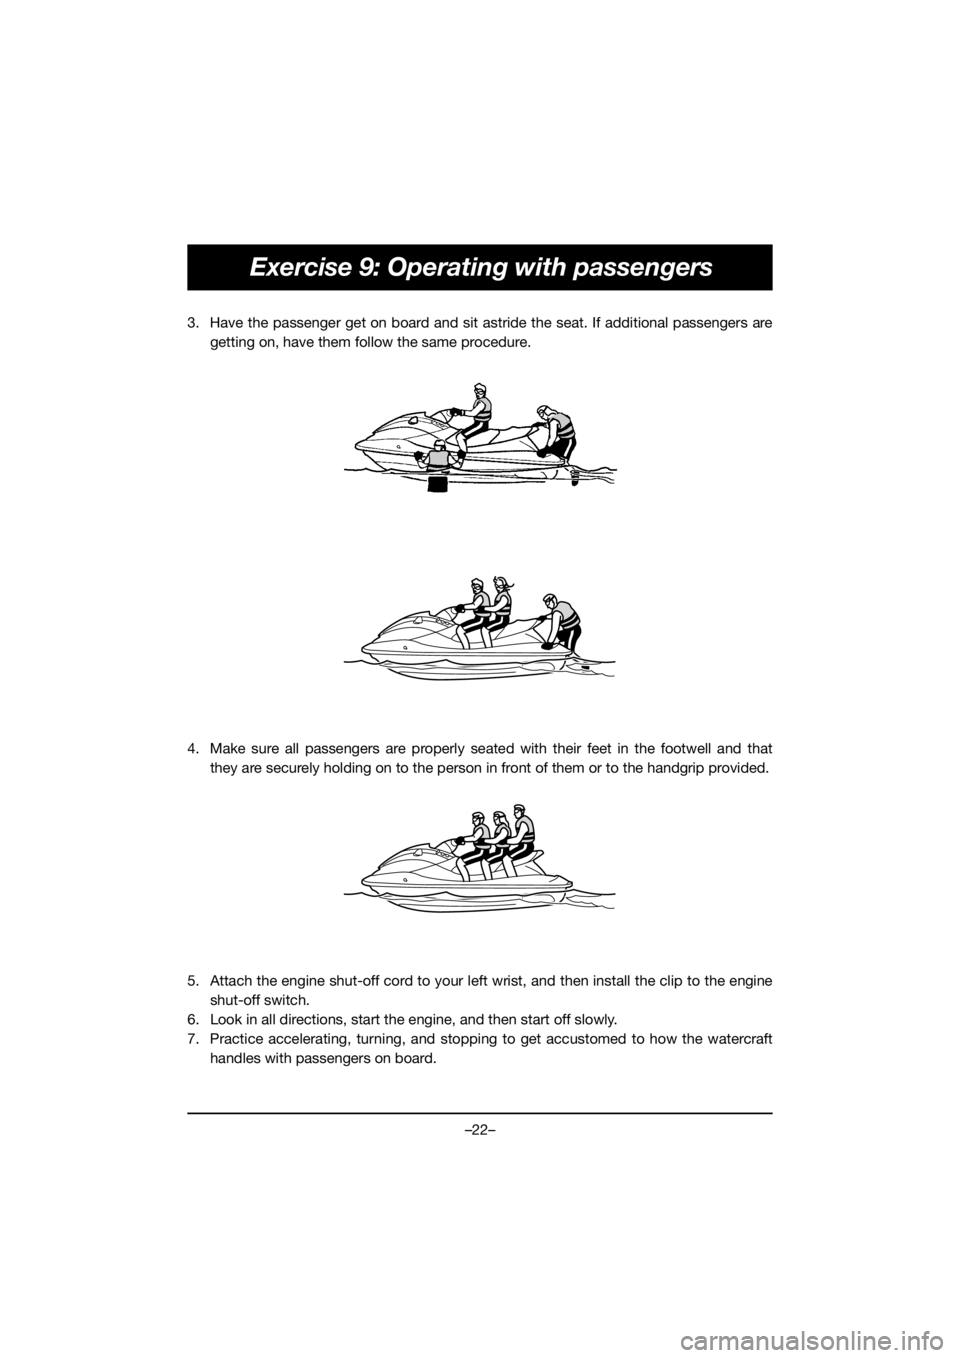 YAMAHA EXR 2020  Manuale duso (in Italian) –22–
Exercise 9: Operating with passengers
3. Have the passenger get on board and sit astride the seat. If additional passengers are
getting on, have them follow the same procedure. 
4. Make sure 